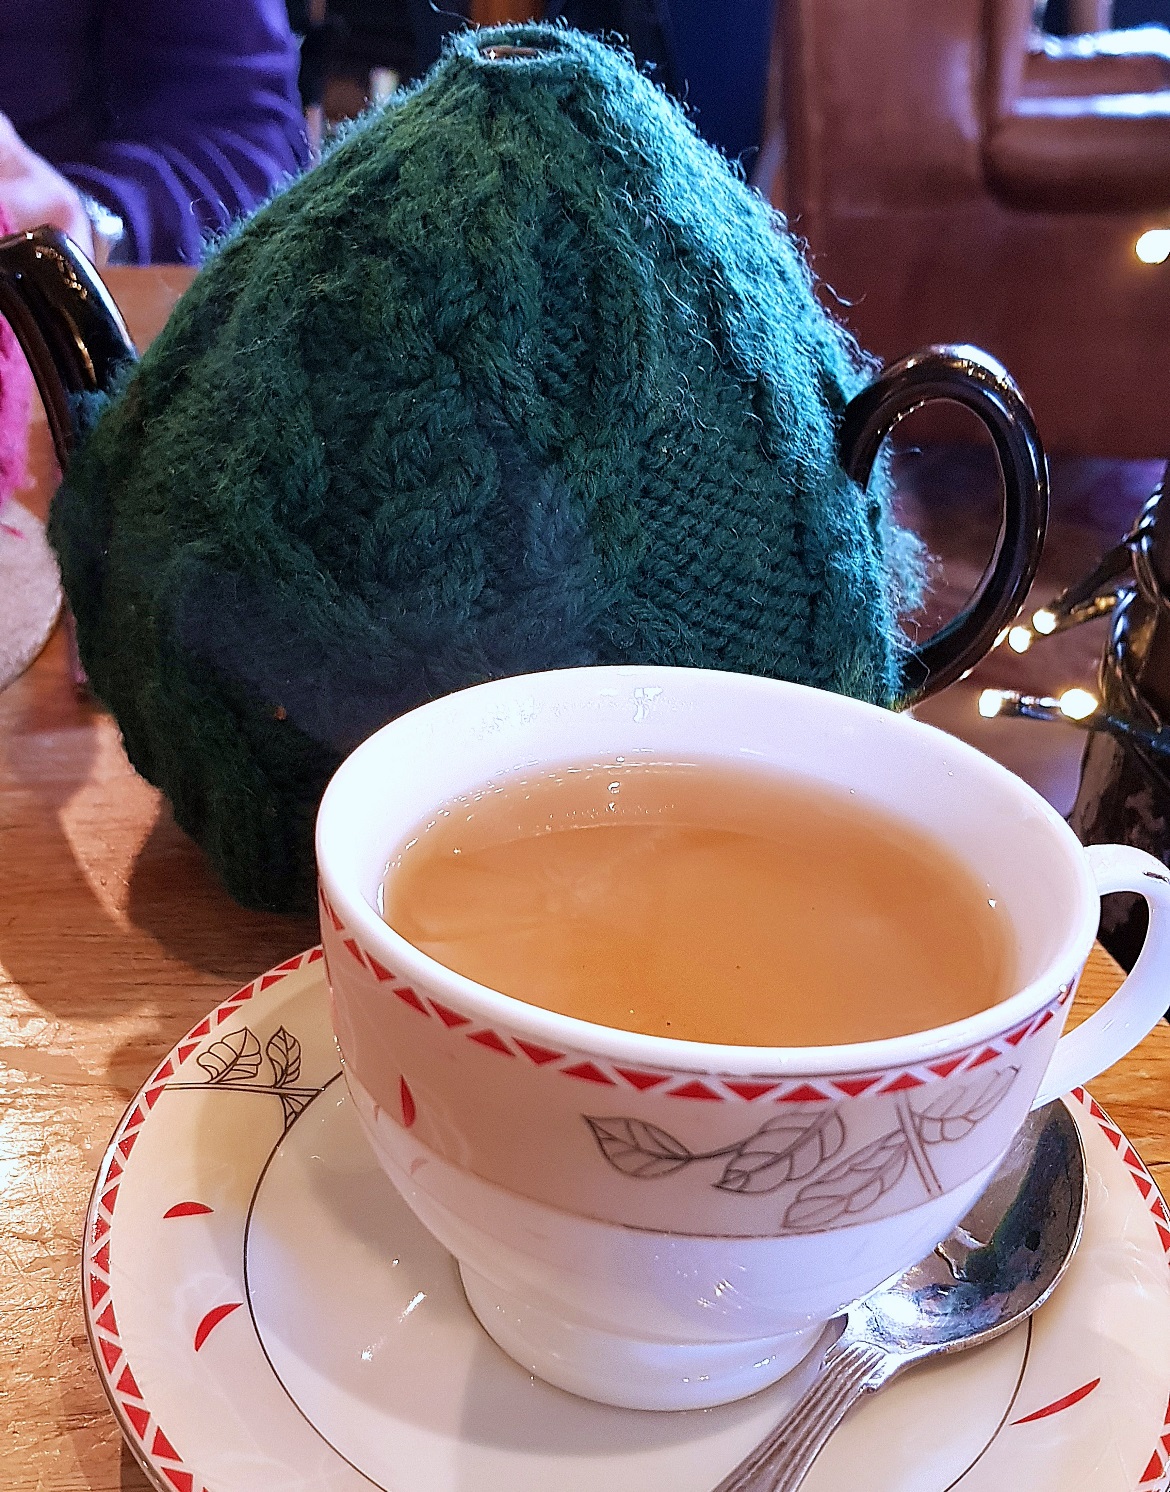 Jasmine tea at Teahouse Theatre in Vauxhall - November Monthly Recap by BeckyBecky Blogs